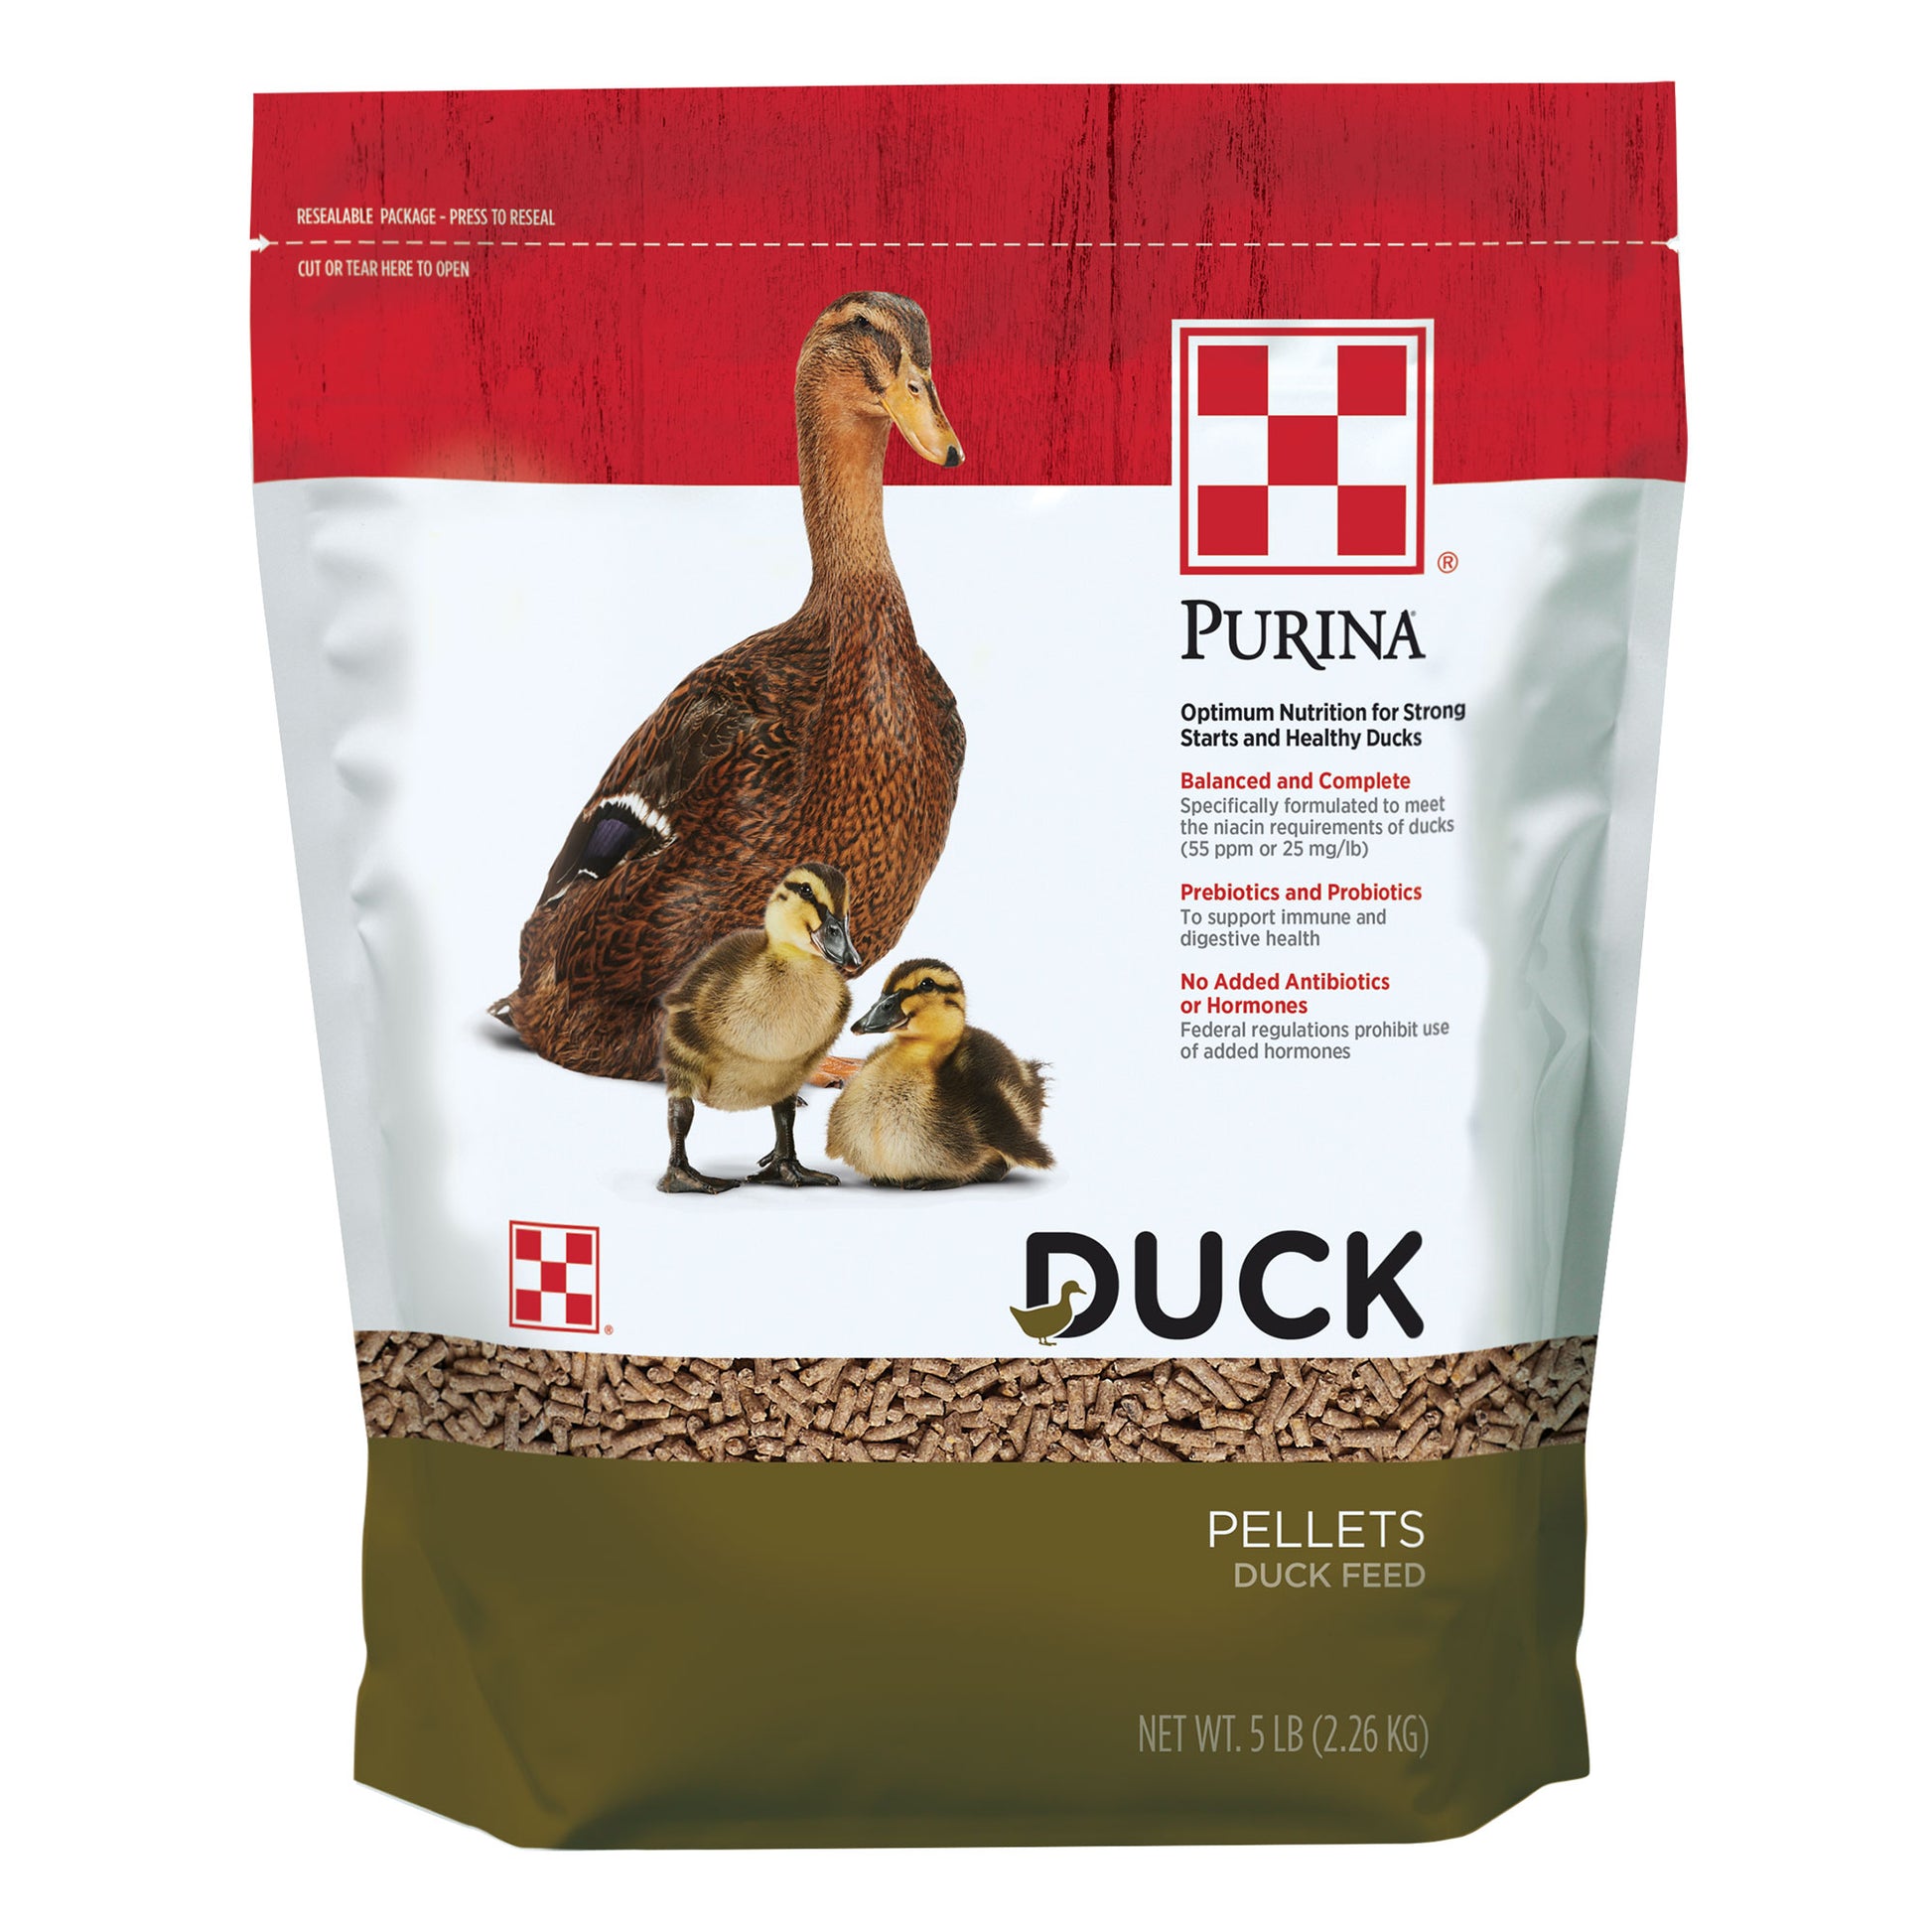 Purina Duck Feed Pellets 5 Pound bag